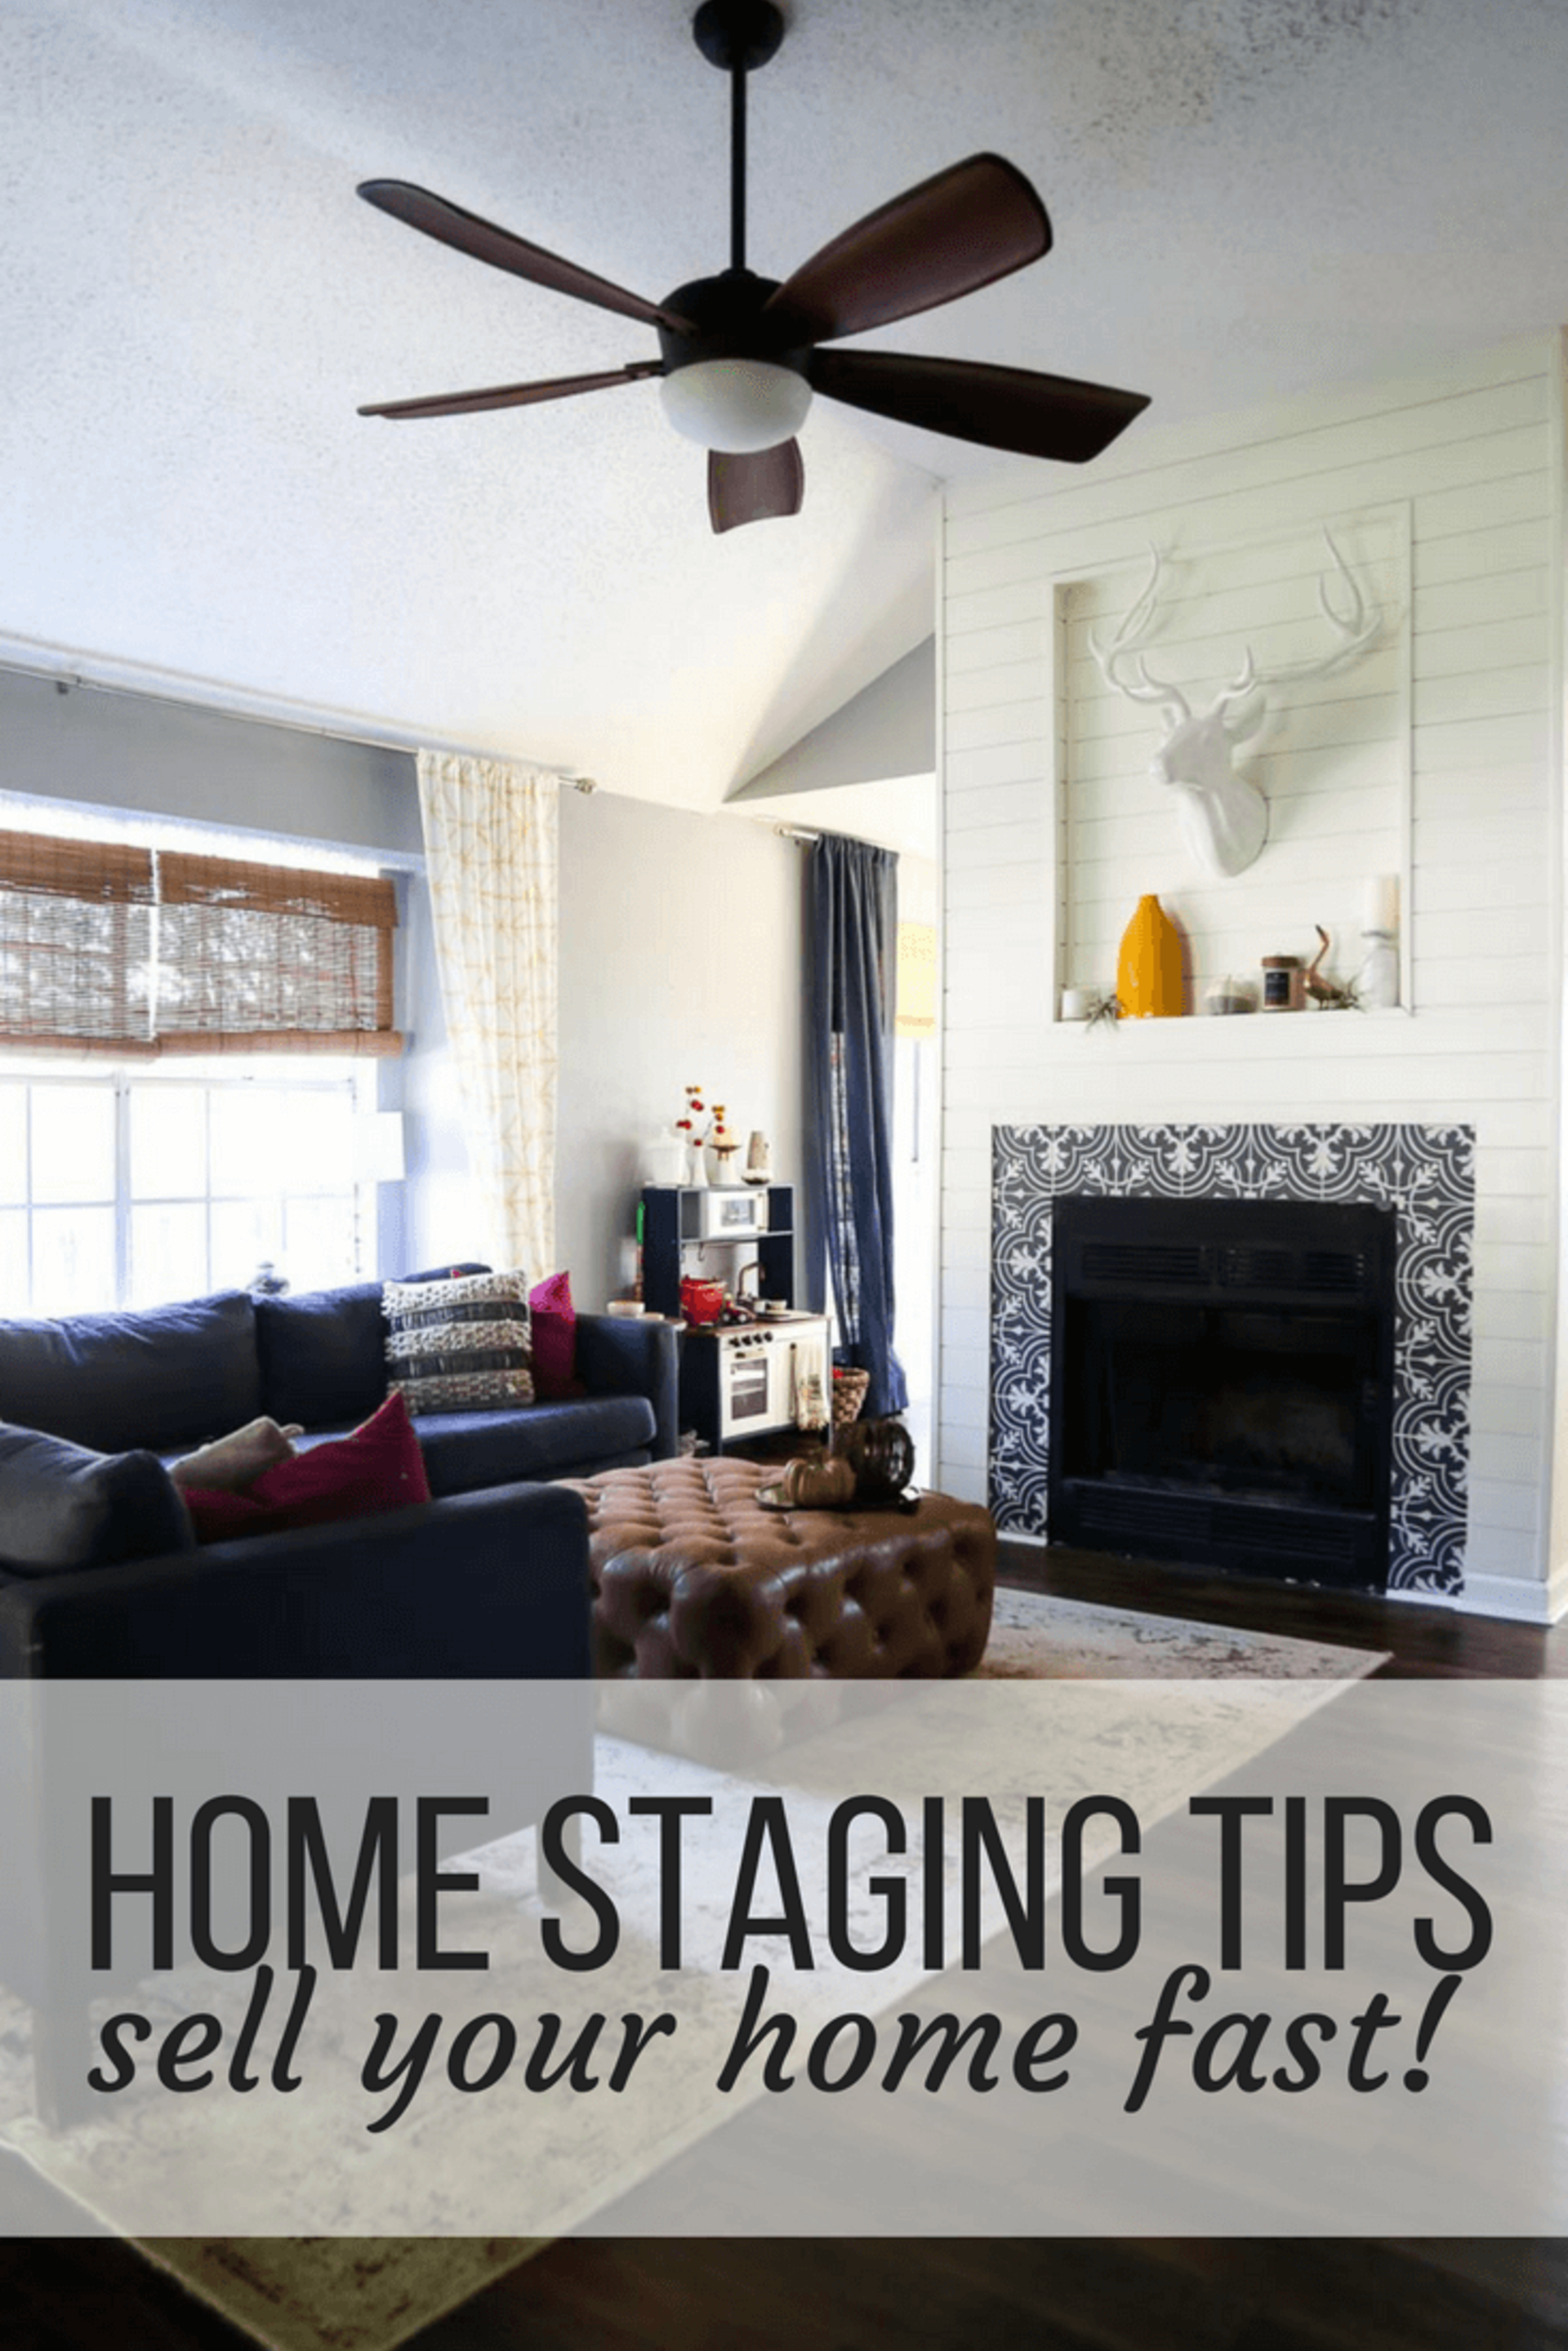 The Staging Guide Checklist Ready, set, stage!